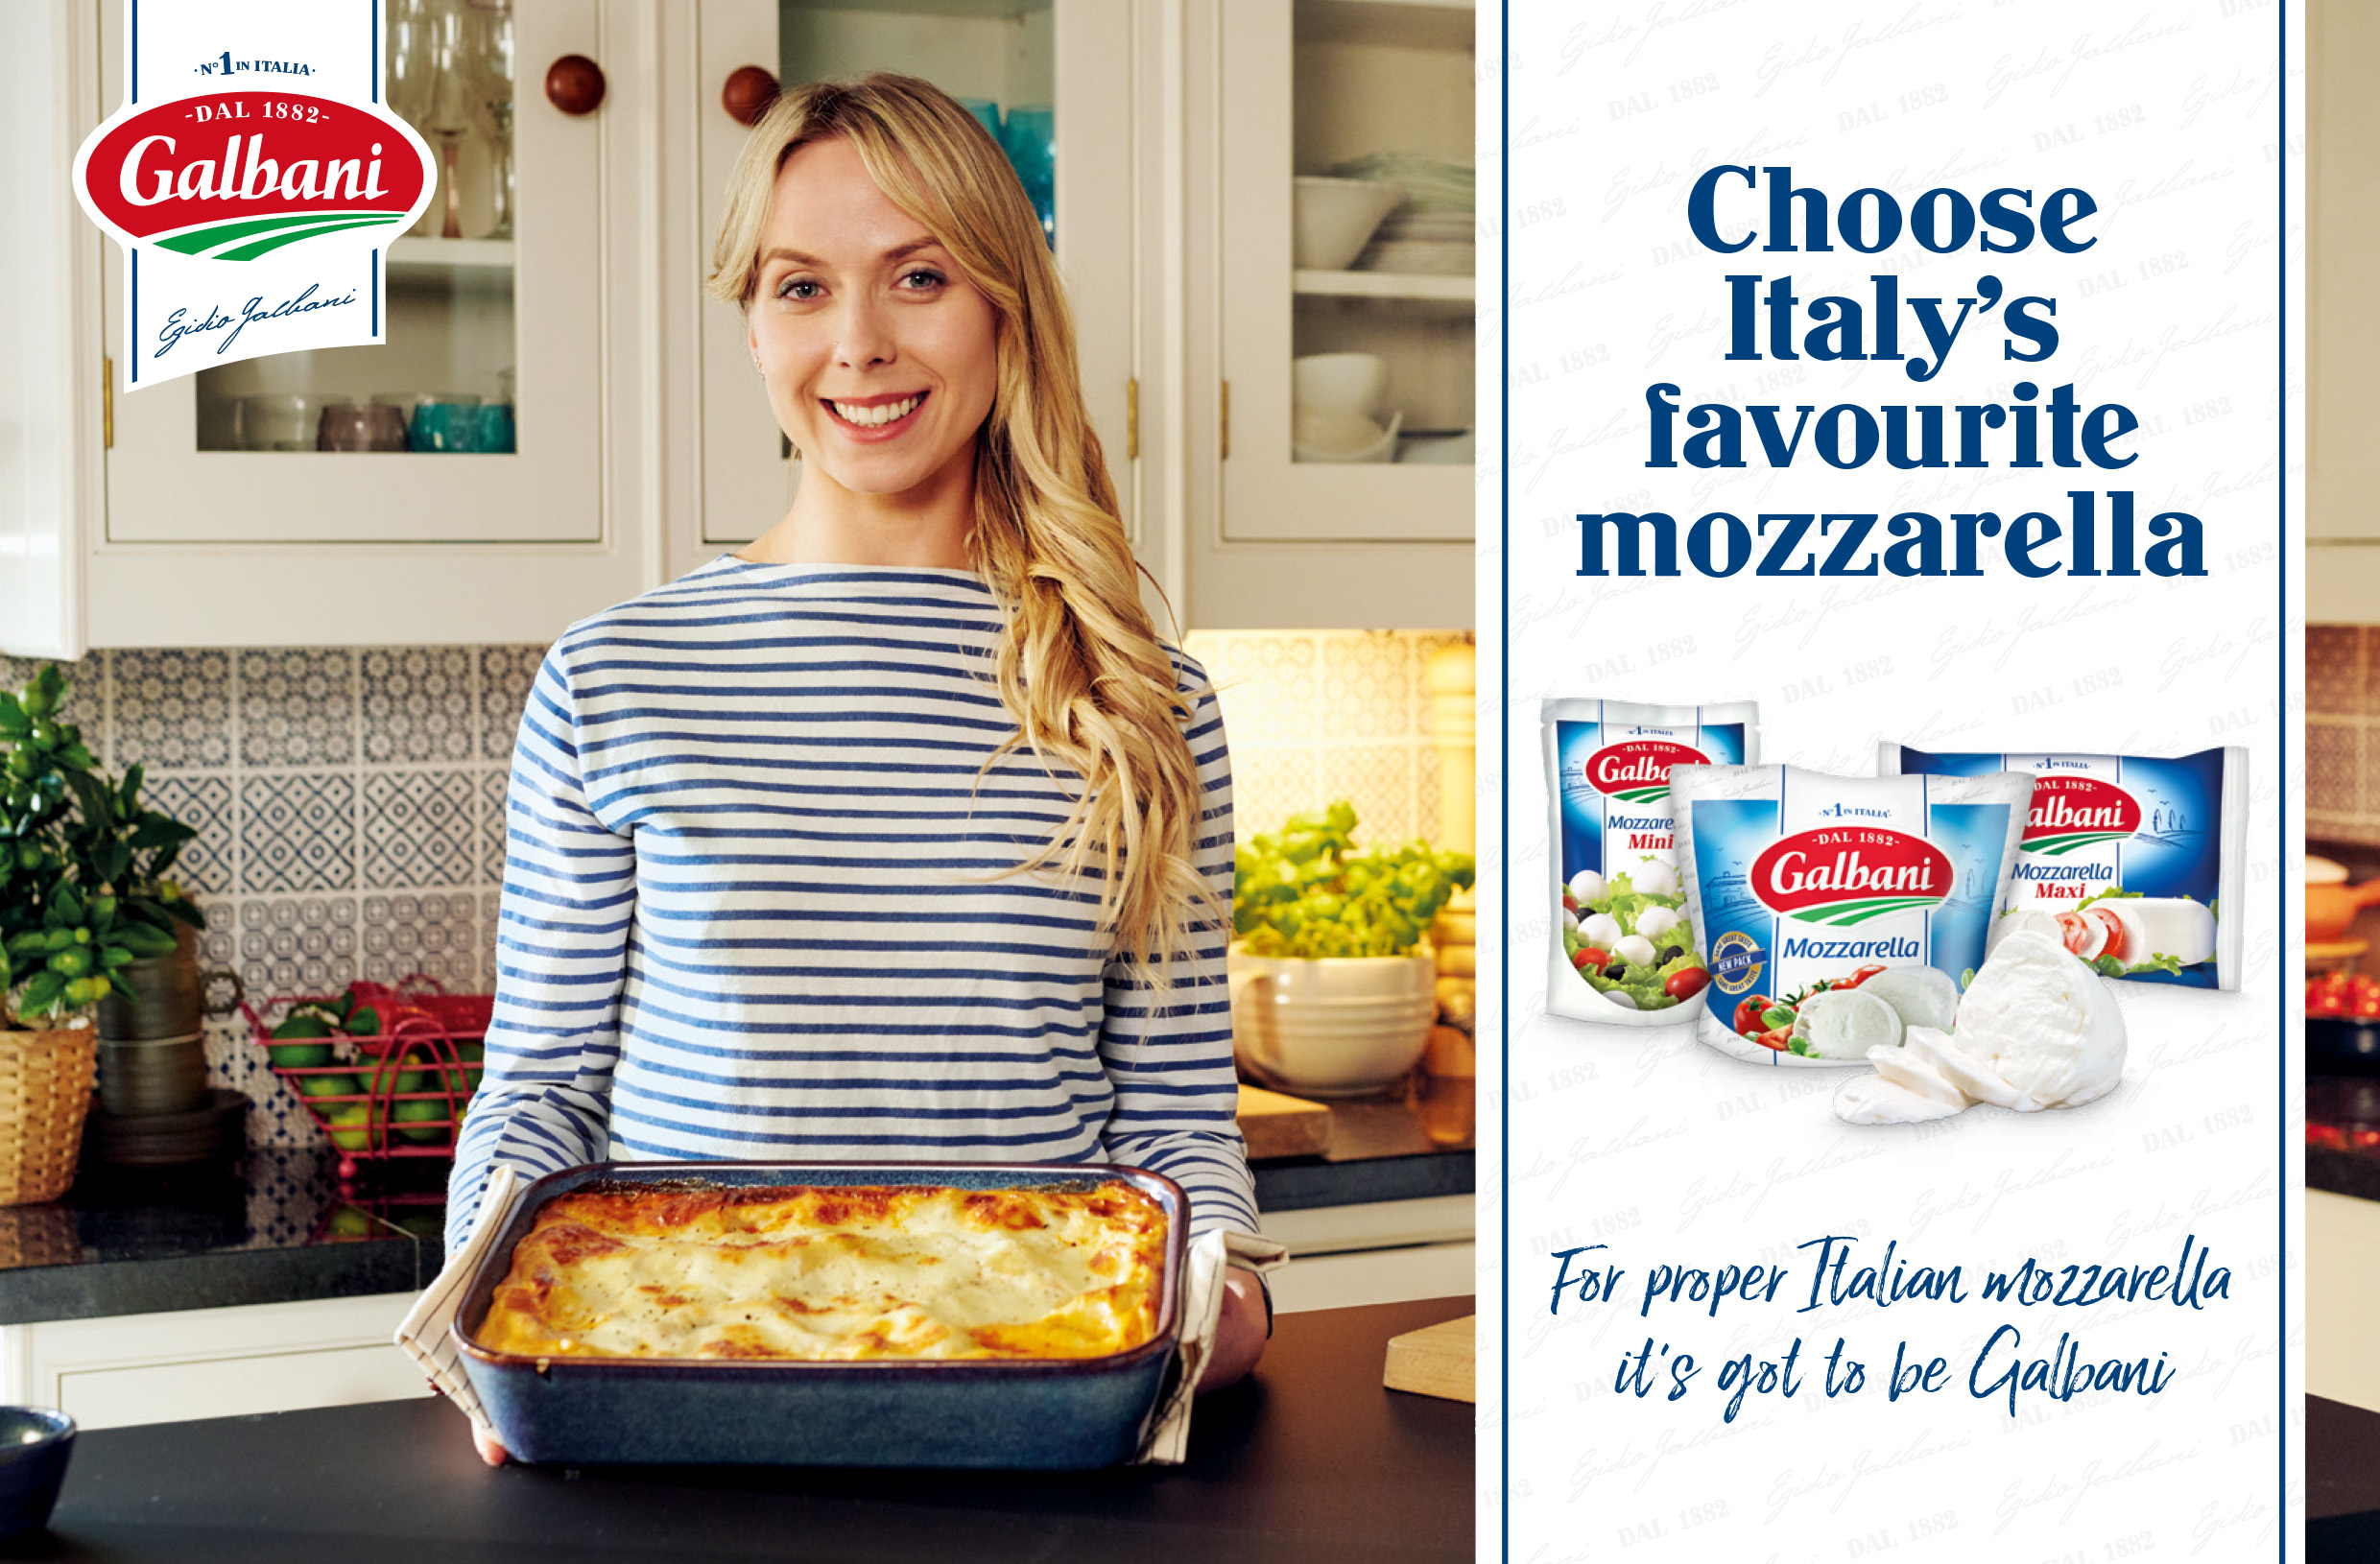 New media campaign from Galbani inspires consumers to cook Italian